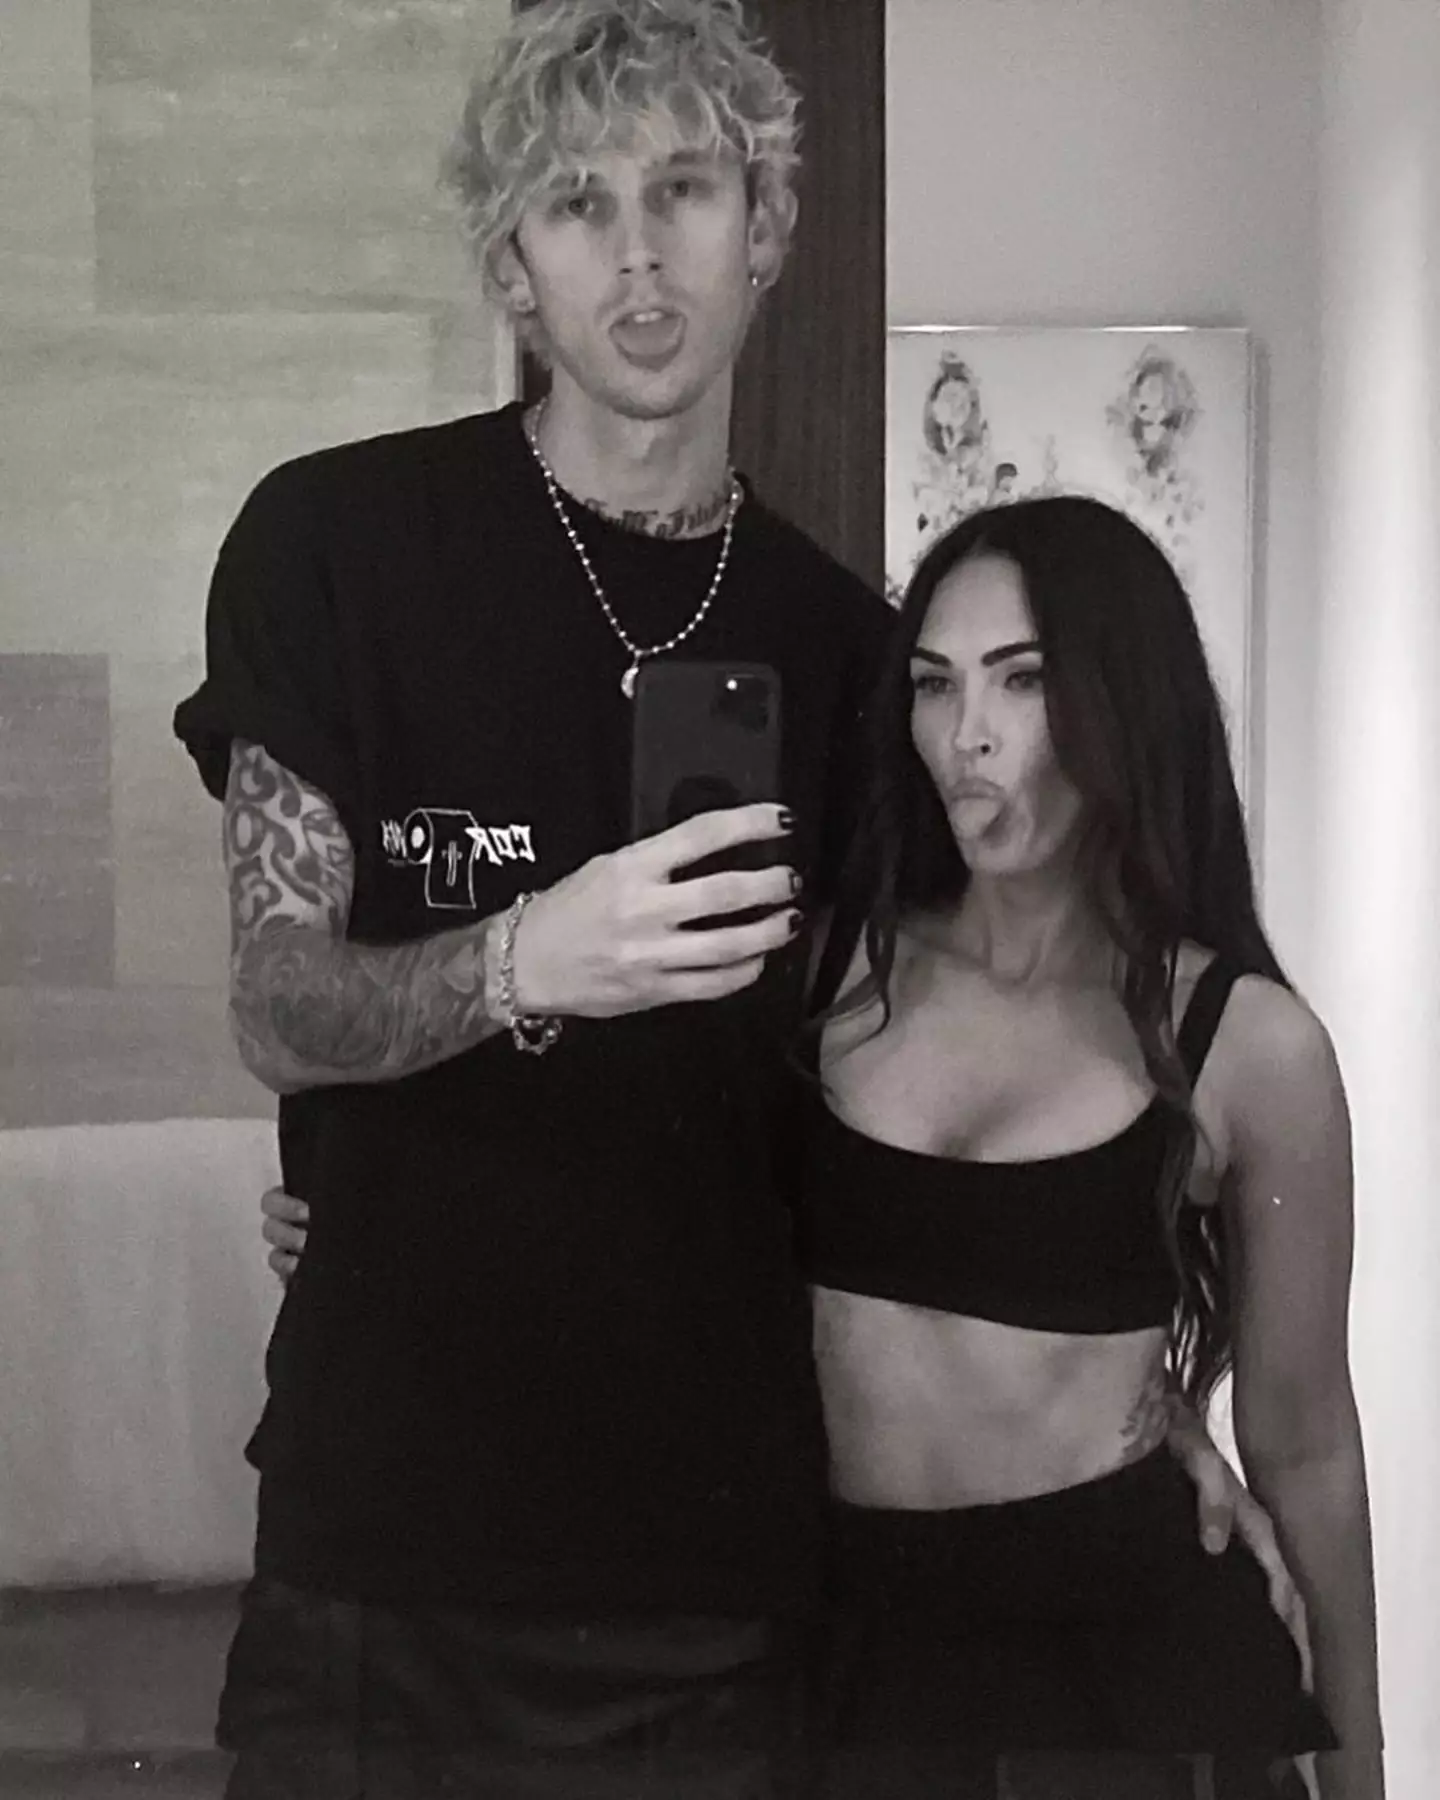 MGK and Megan met in 2020 and became engaged in 2022.